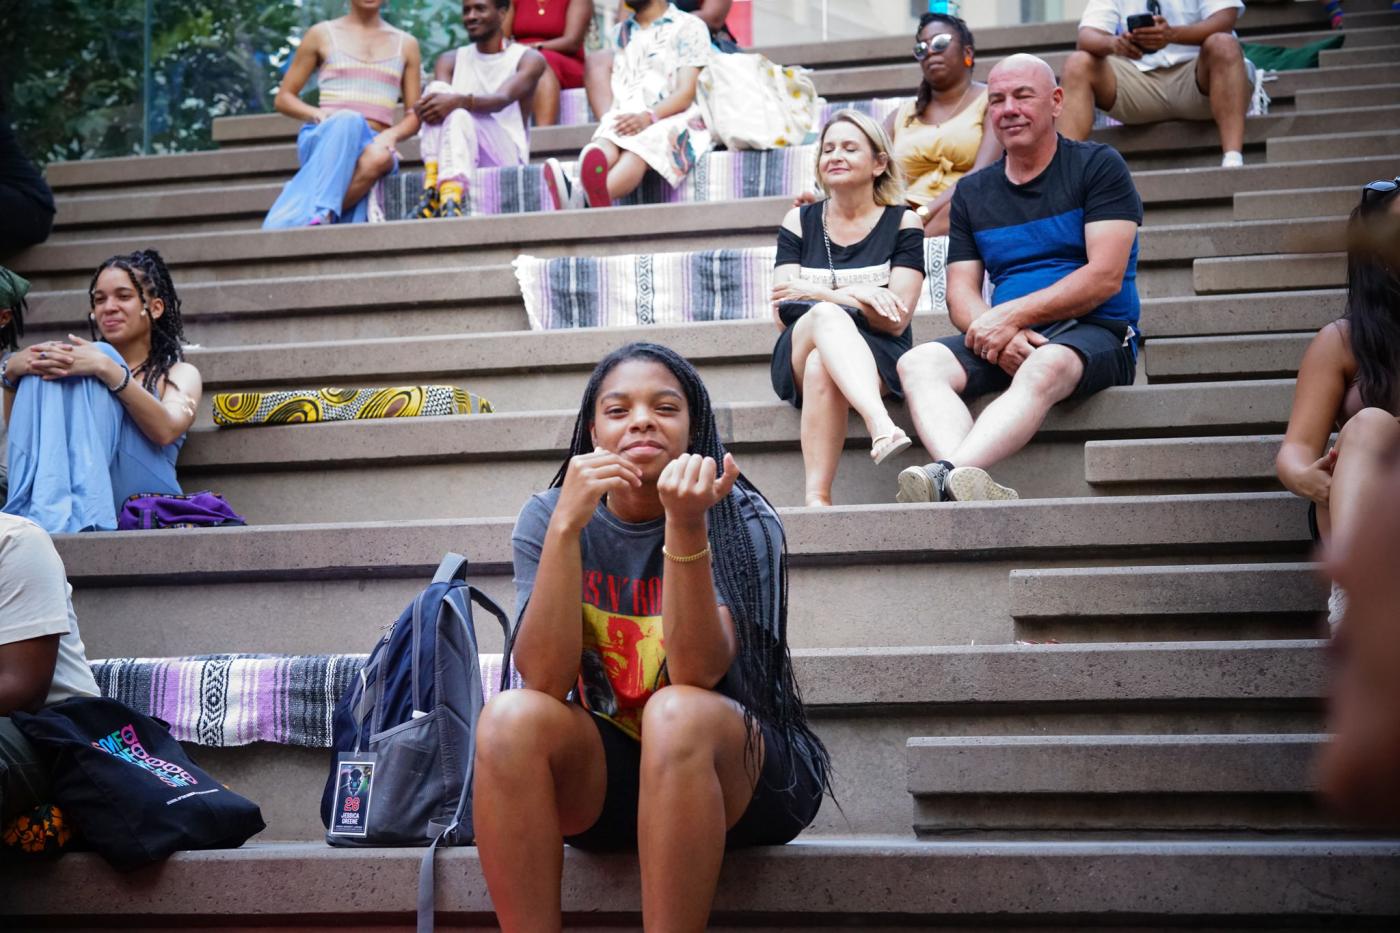 A young Black girl smiles. Behind her, a crowd of folks watch something while all sitting on stone steps.